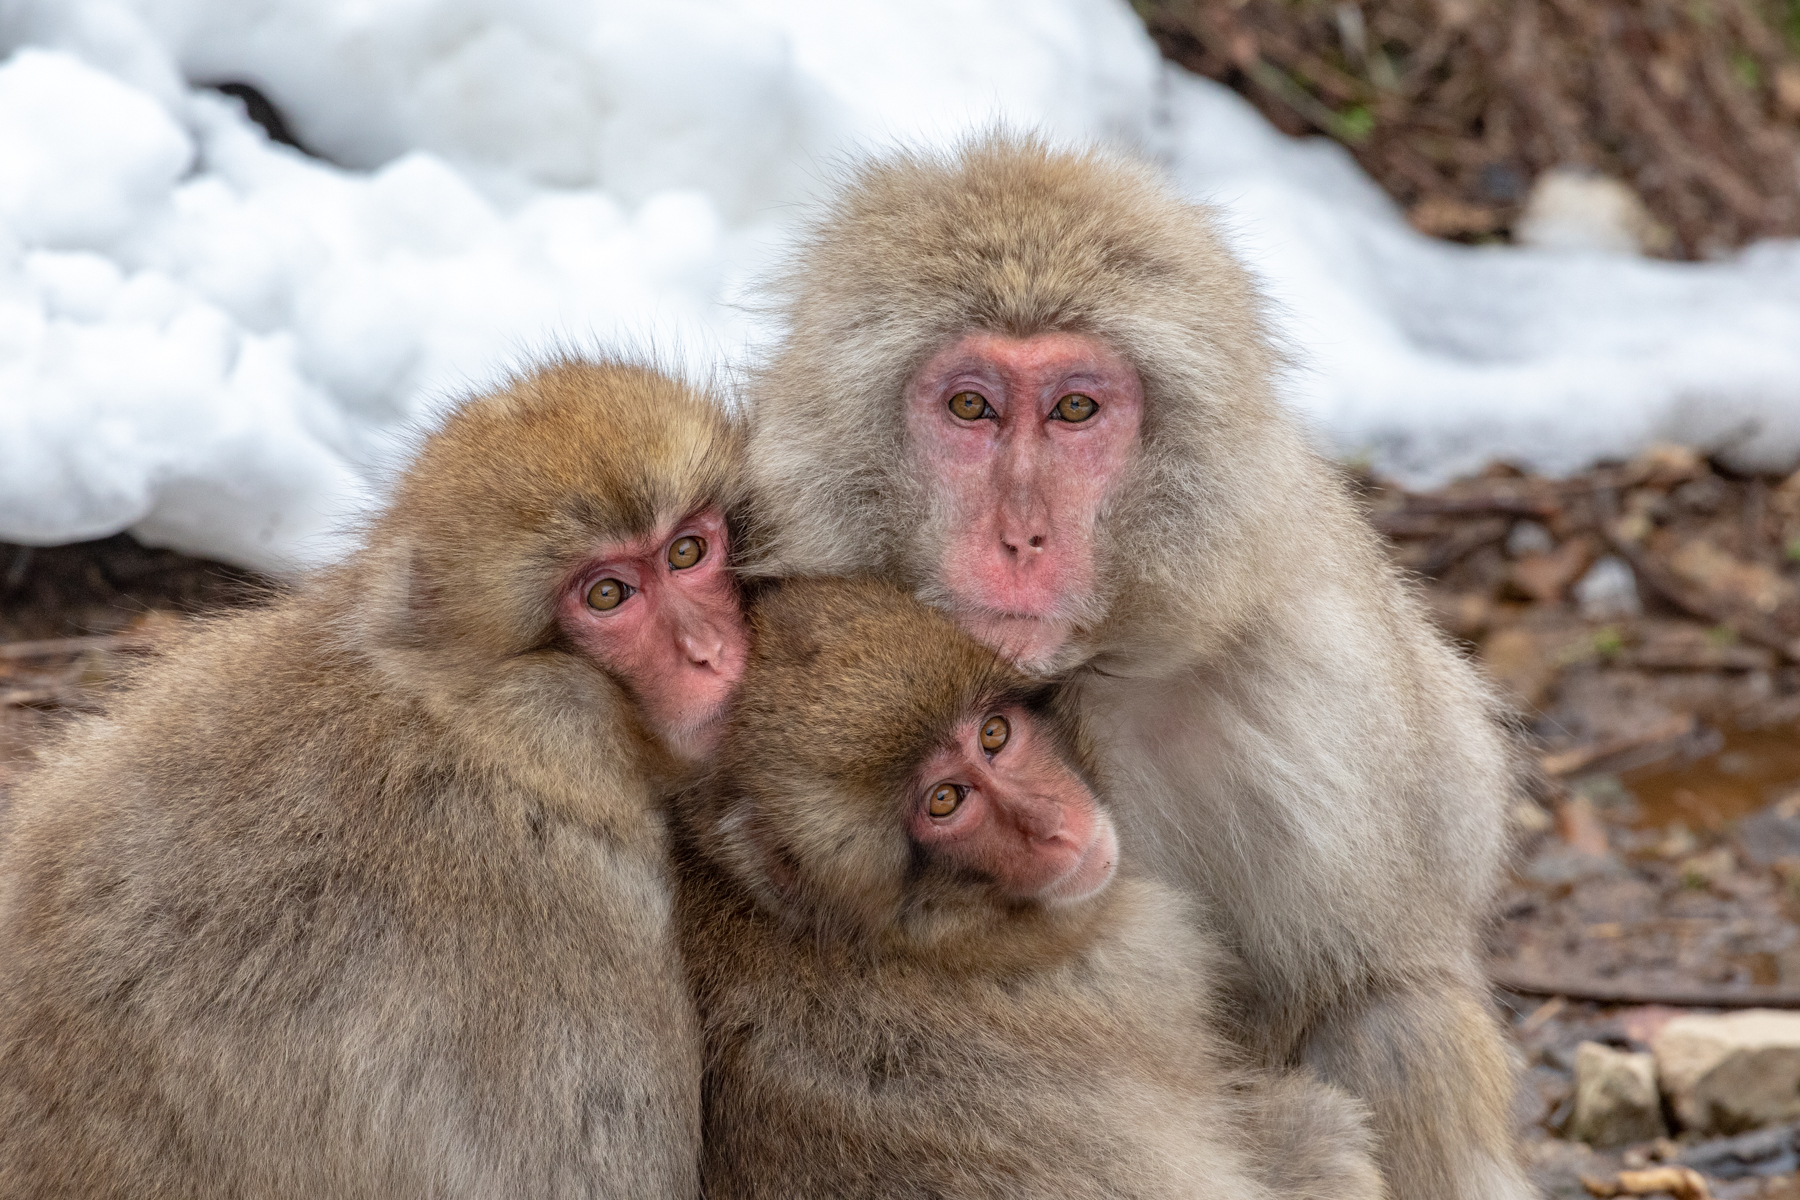 Snow Monkeys often huddle together for warmth in the cold winter of the Japanese Alps (image by Mark Beaman)